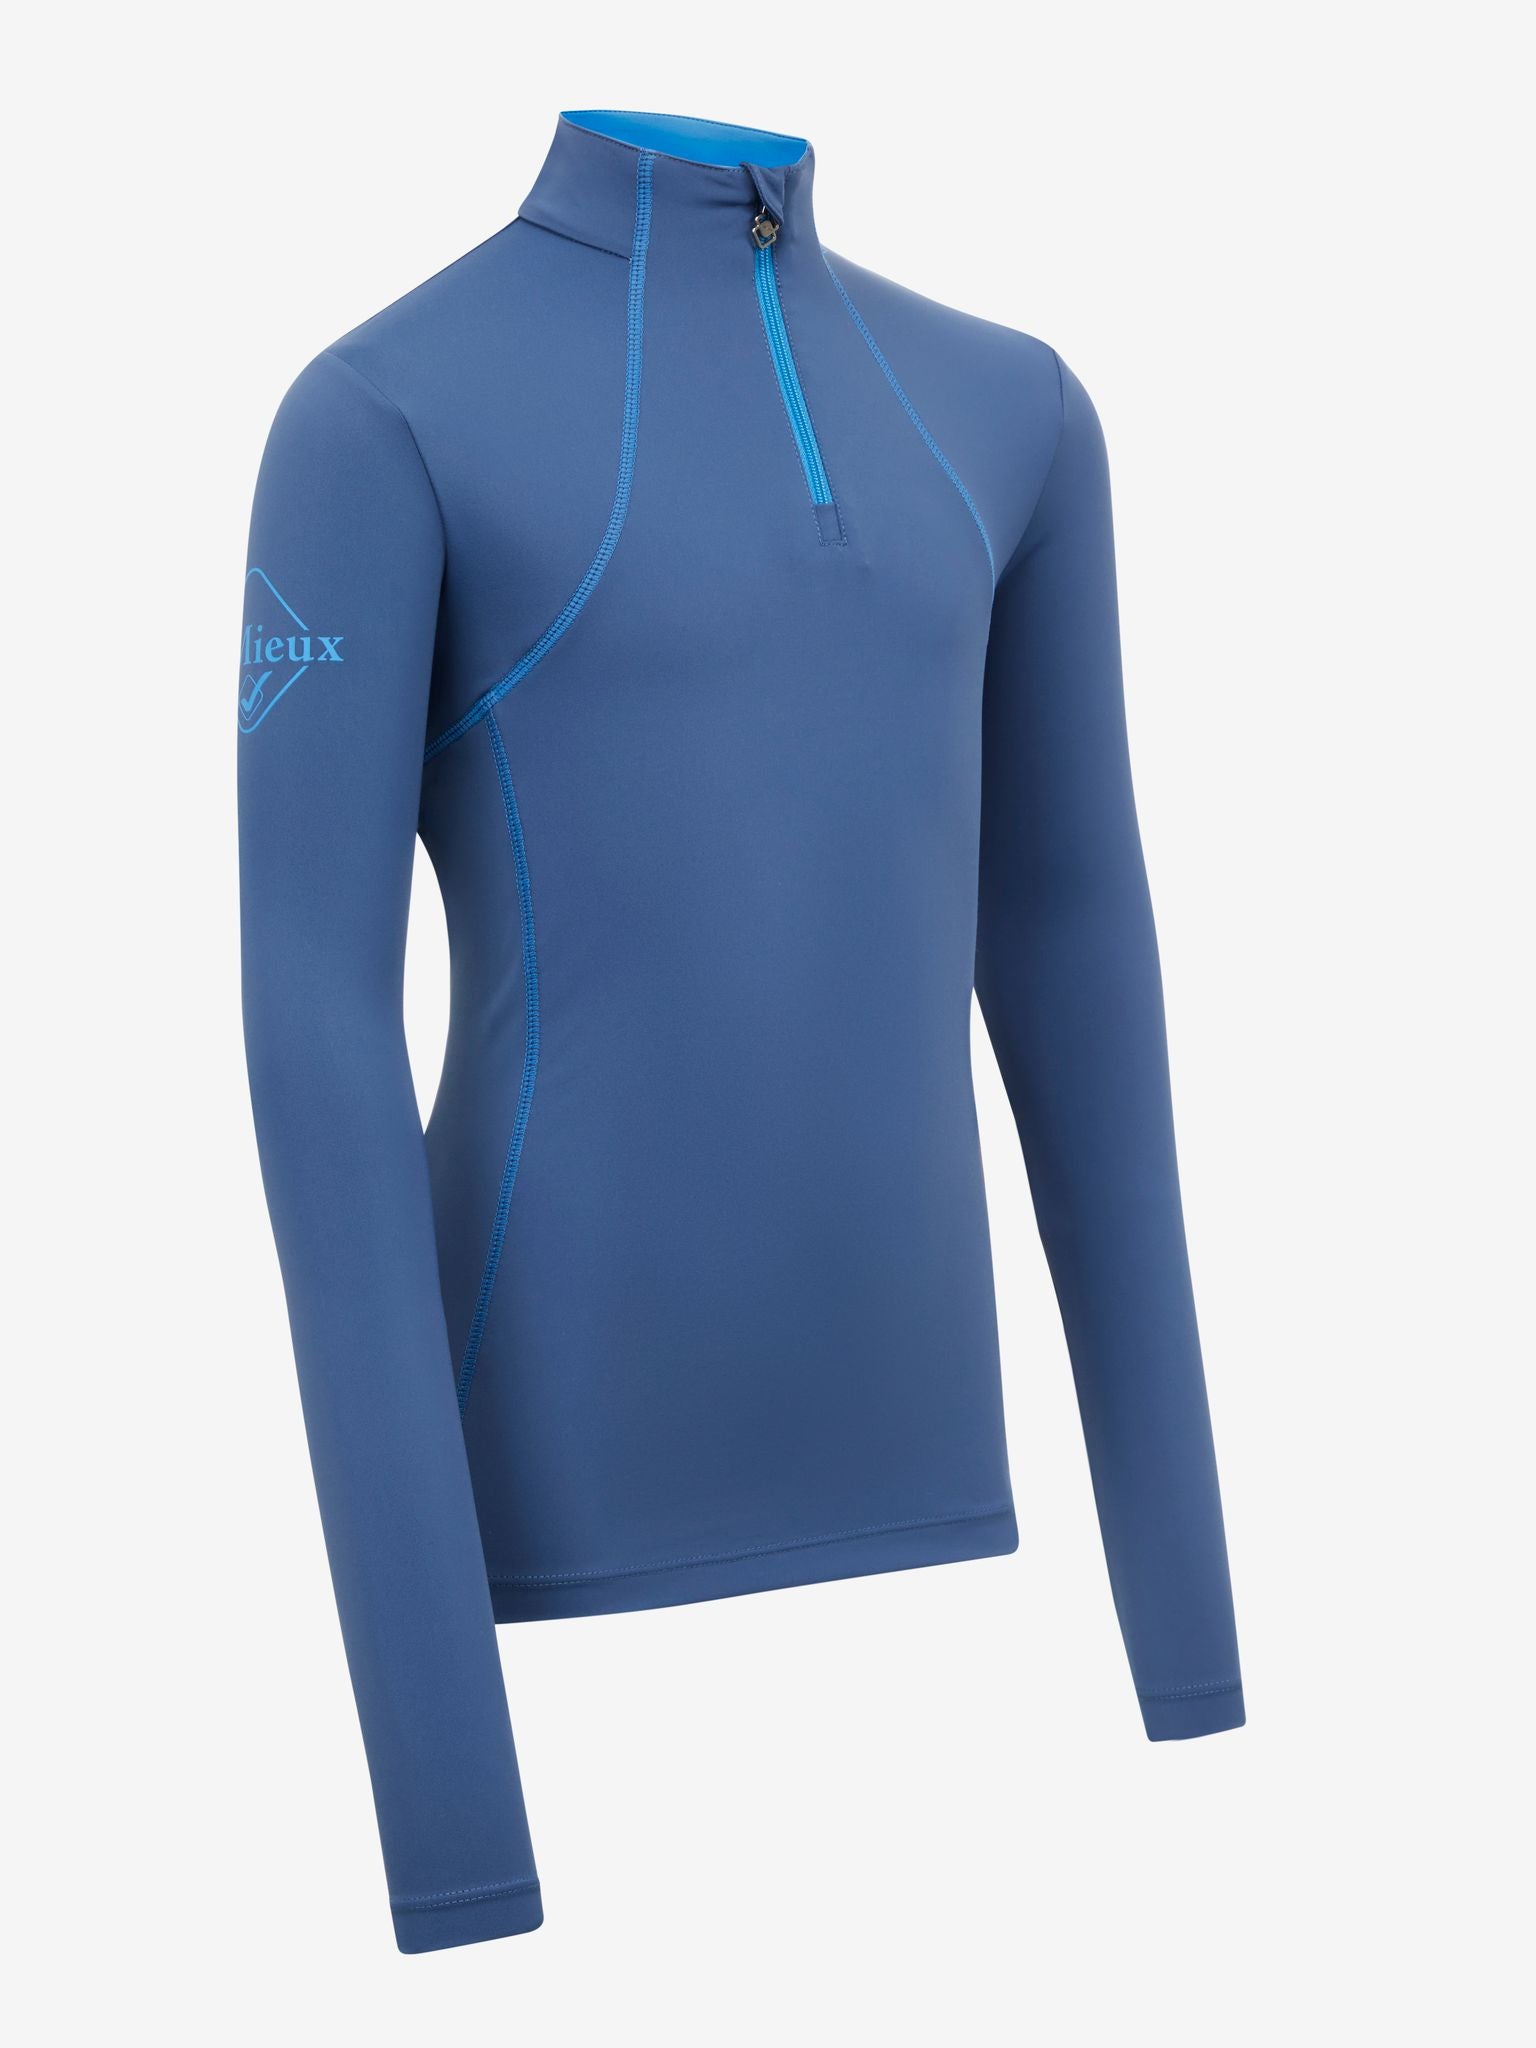 Men's base layers and thermal underwear: sports base layers for men – Halti  Global Store